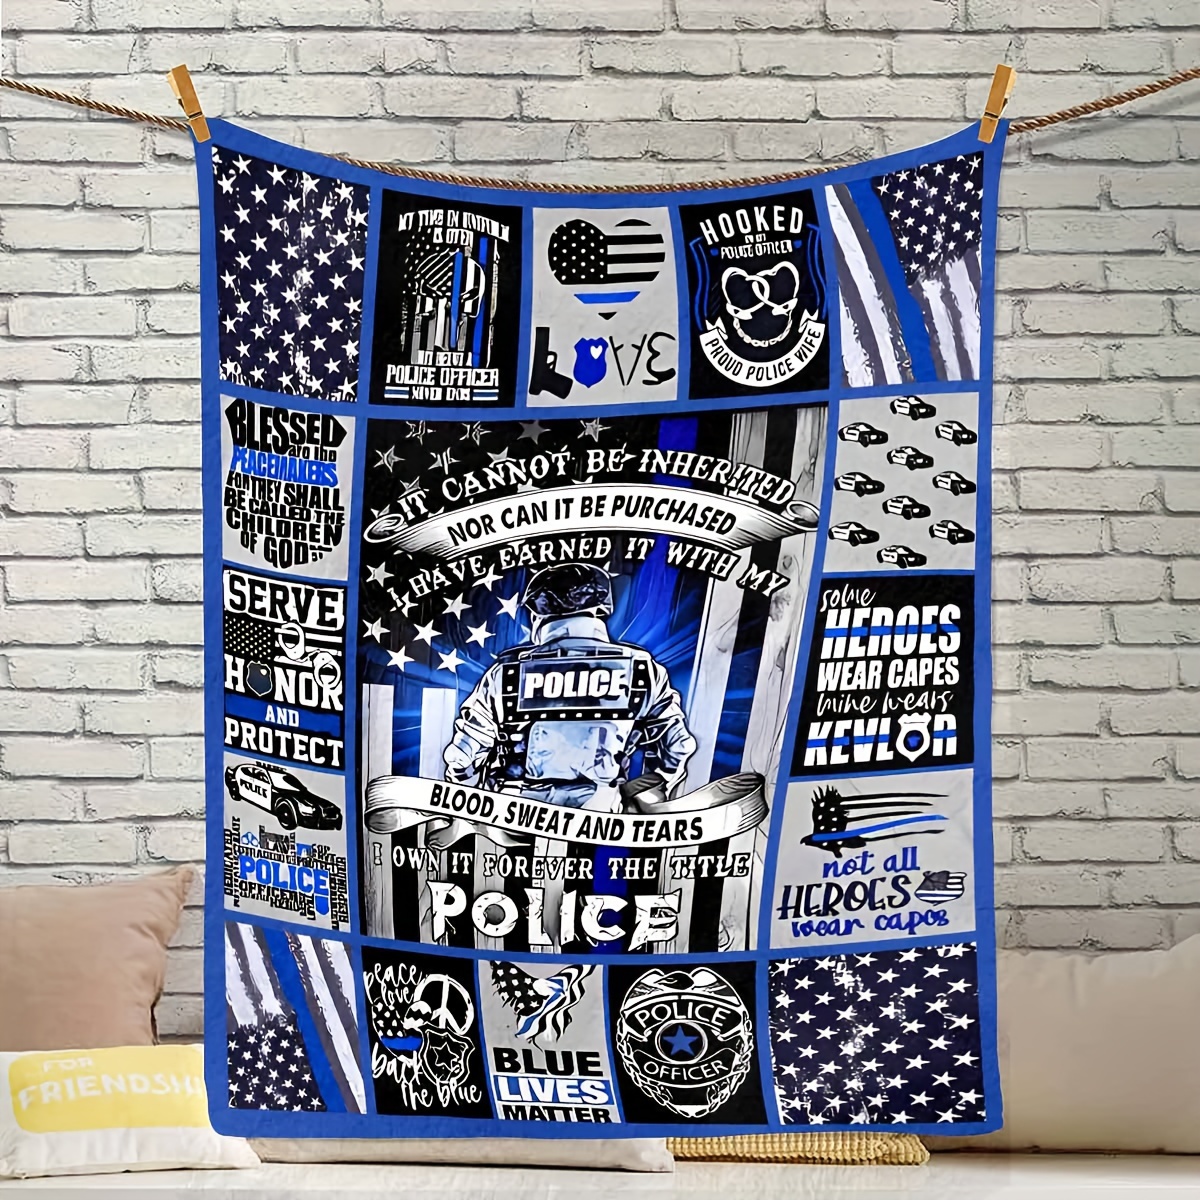 Wisegem Police Gifts - Blue Lives Matter 60x50 Blanket - Police  Retirement Birthday Gift Ideas for Men- Thin Blue Line Gifts - Police  Academy